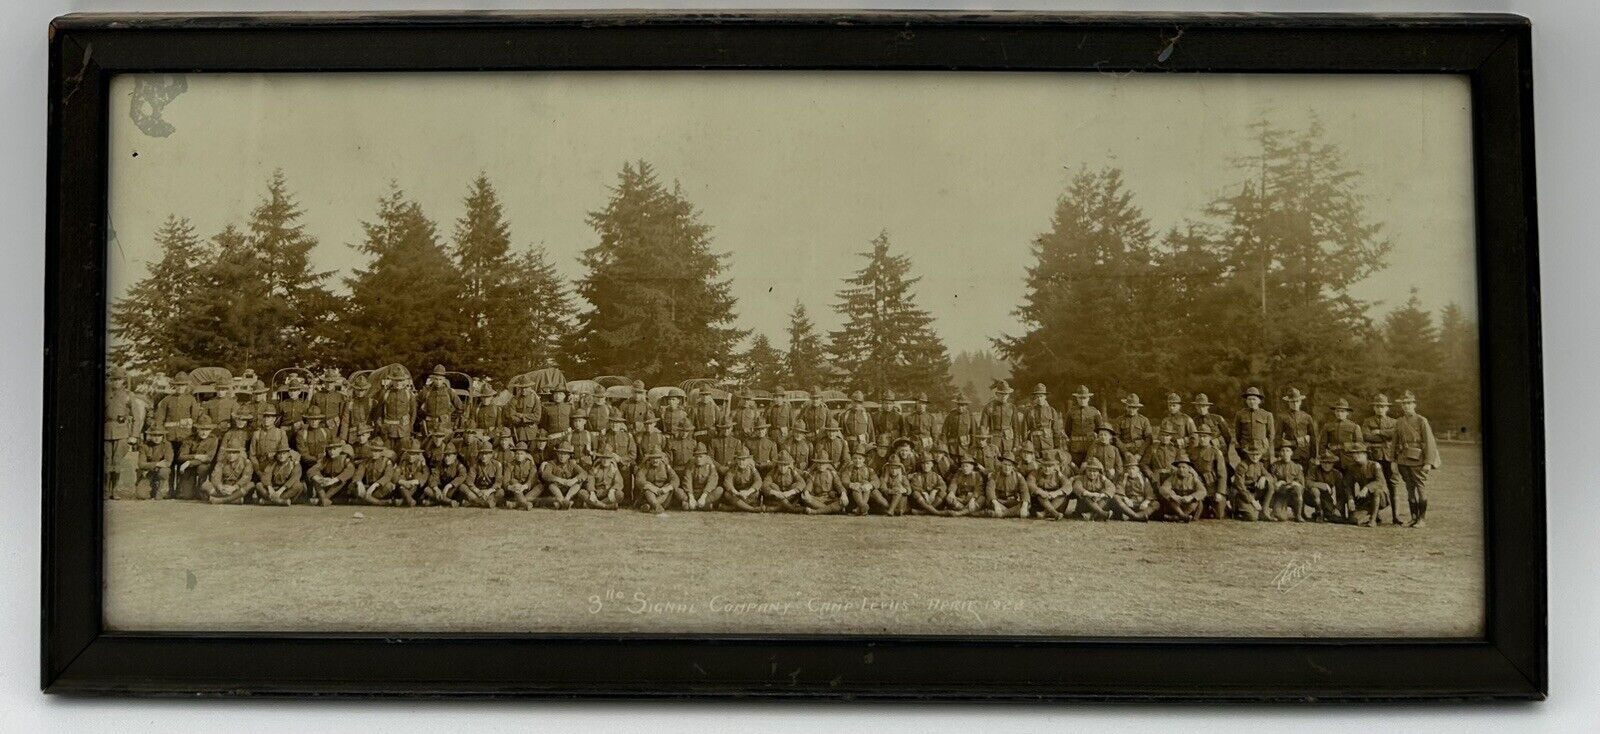 VINTAGE 1922 3rd SIGNAL COMPANY CAMP PHOTOGRAPH OF TROOPS.SIGNED-PARISH?